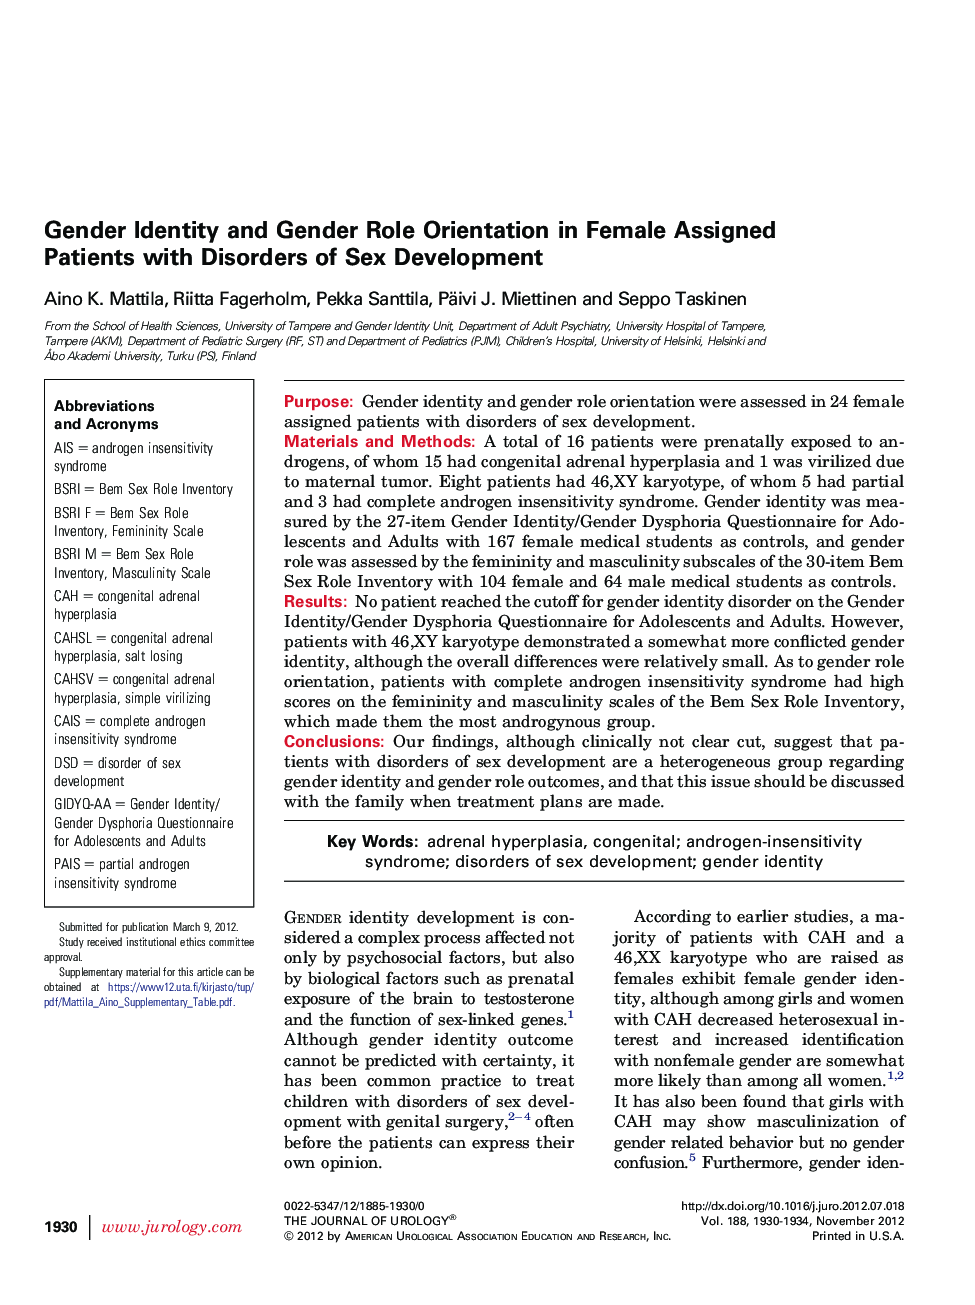 Gender Identity and Gender Role Orientation in Female Assigned Patients with Disorders of Sex Development 